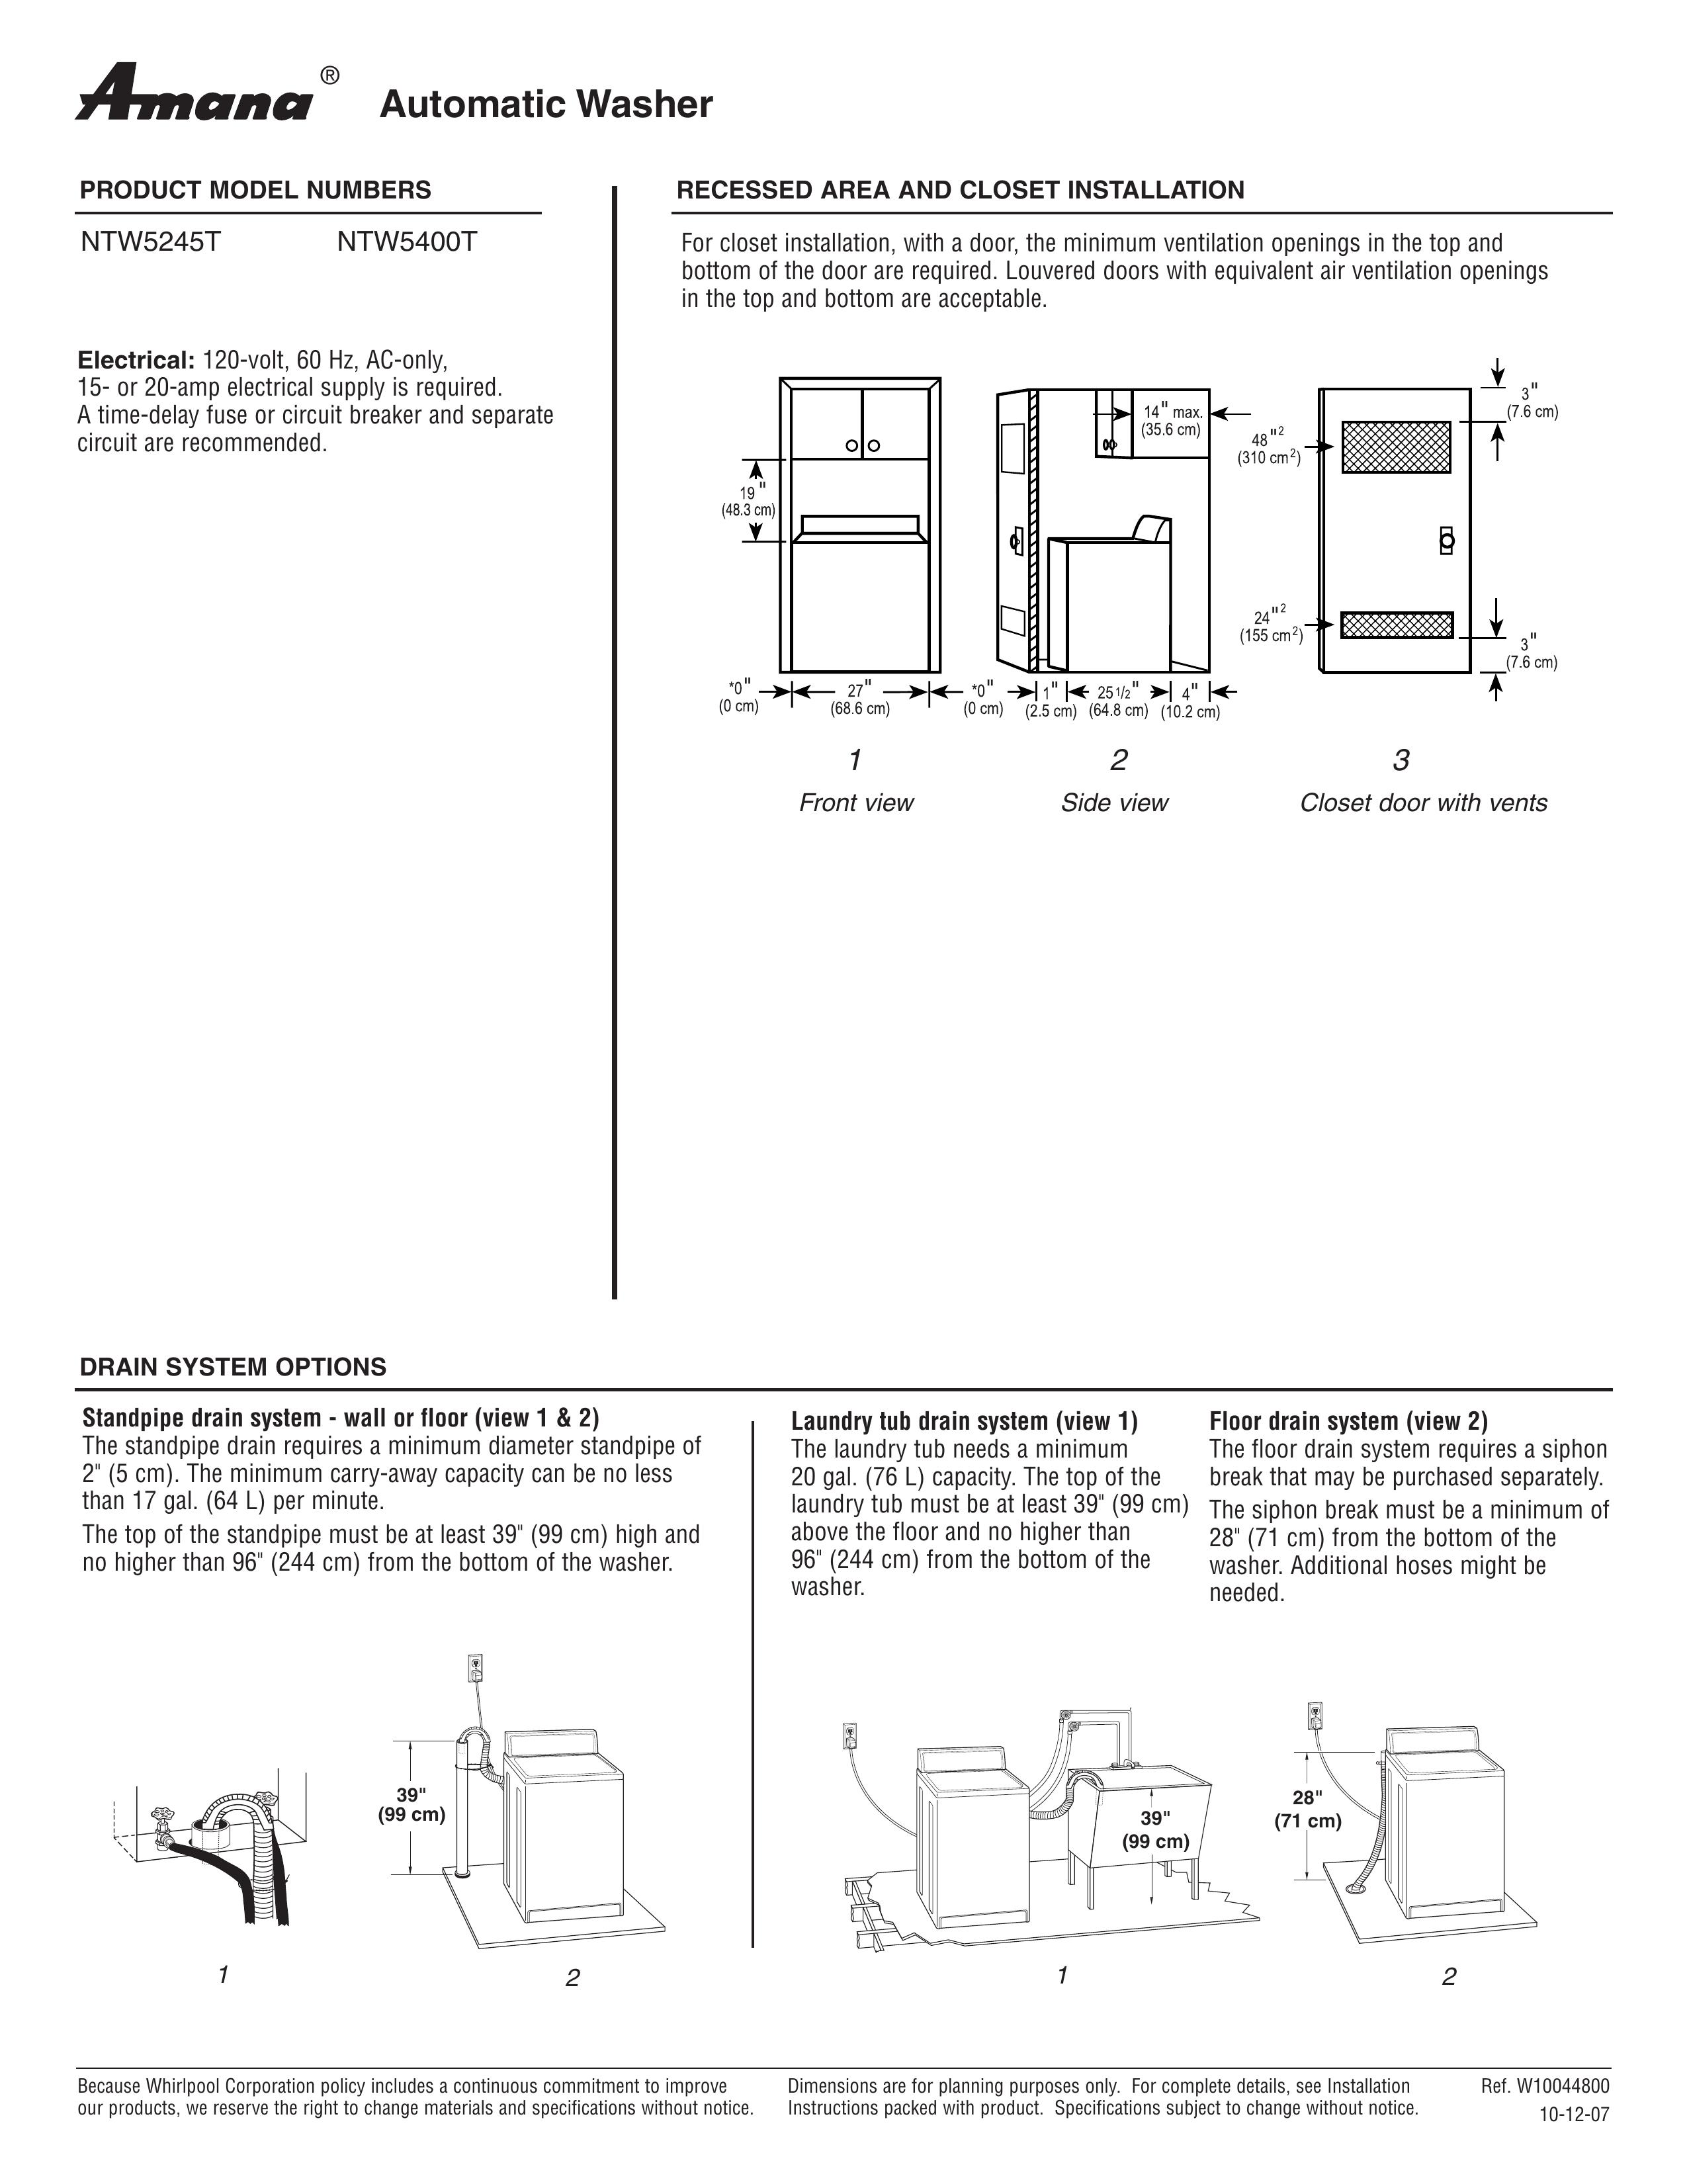 Amana NTW5400T Washer/Dryer User Manual